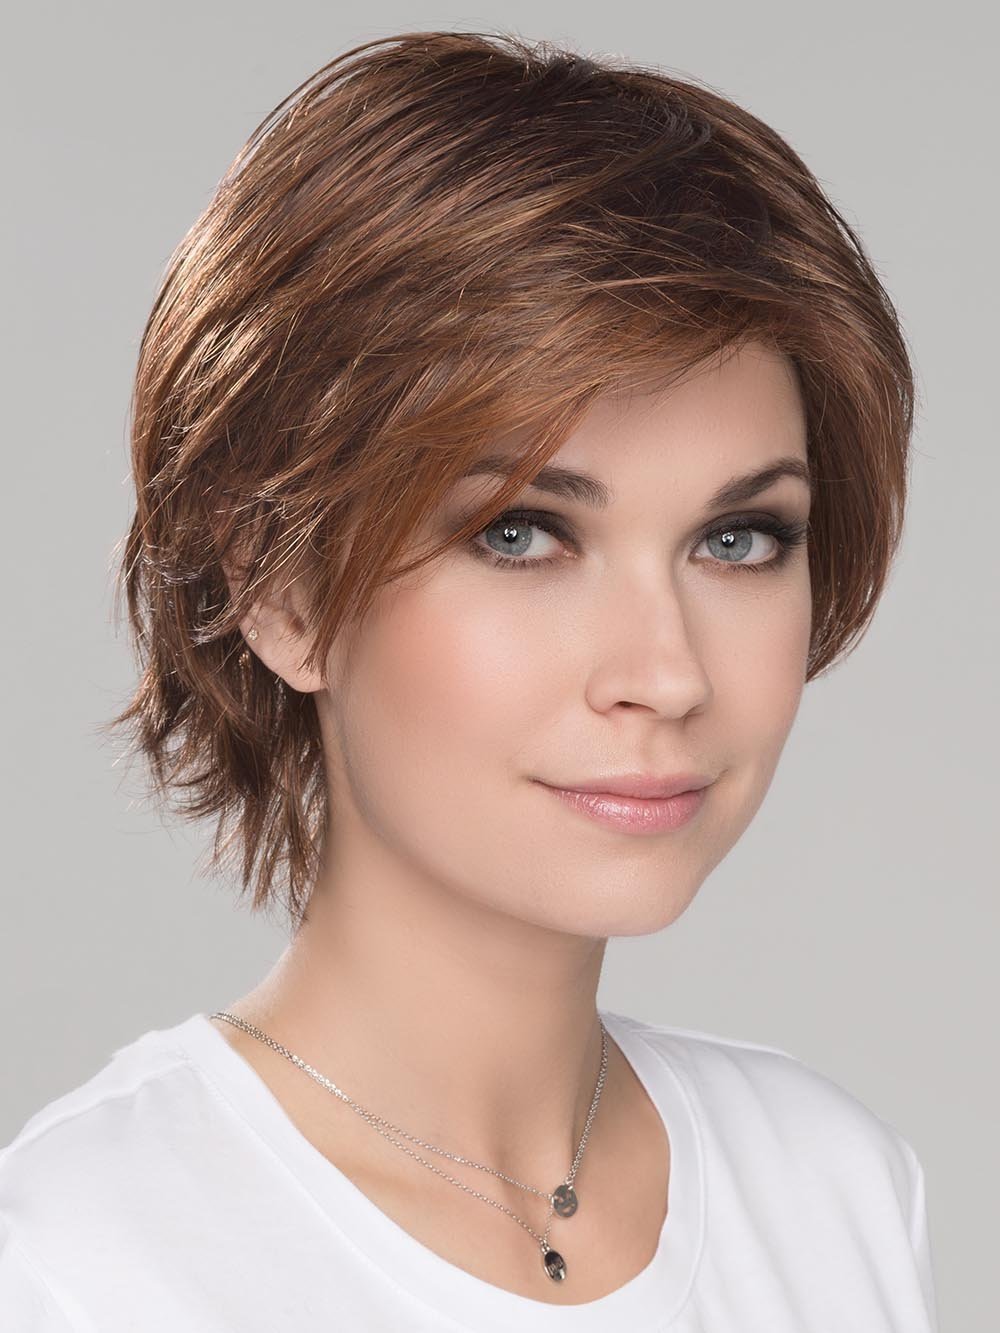 Has just the right length of choppy layers that provide perfect coverage around ears and neckline